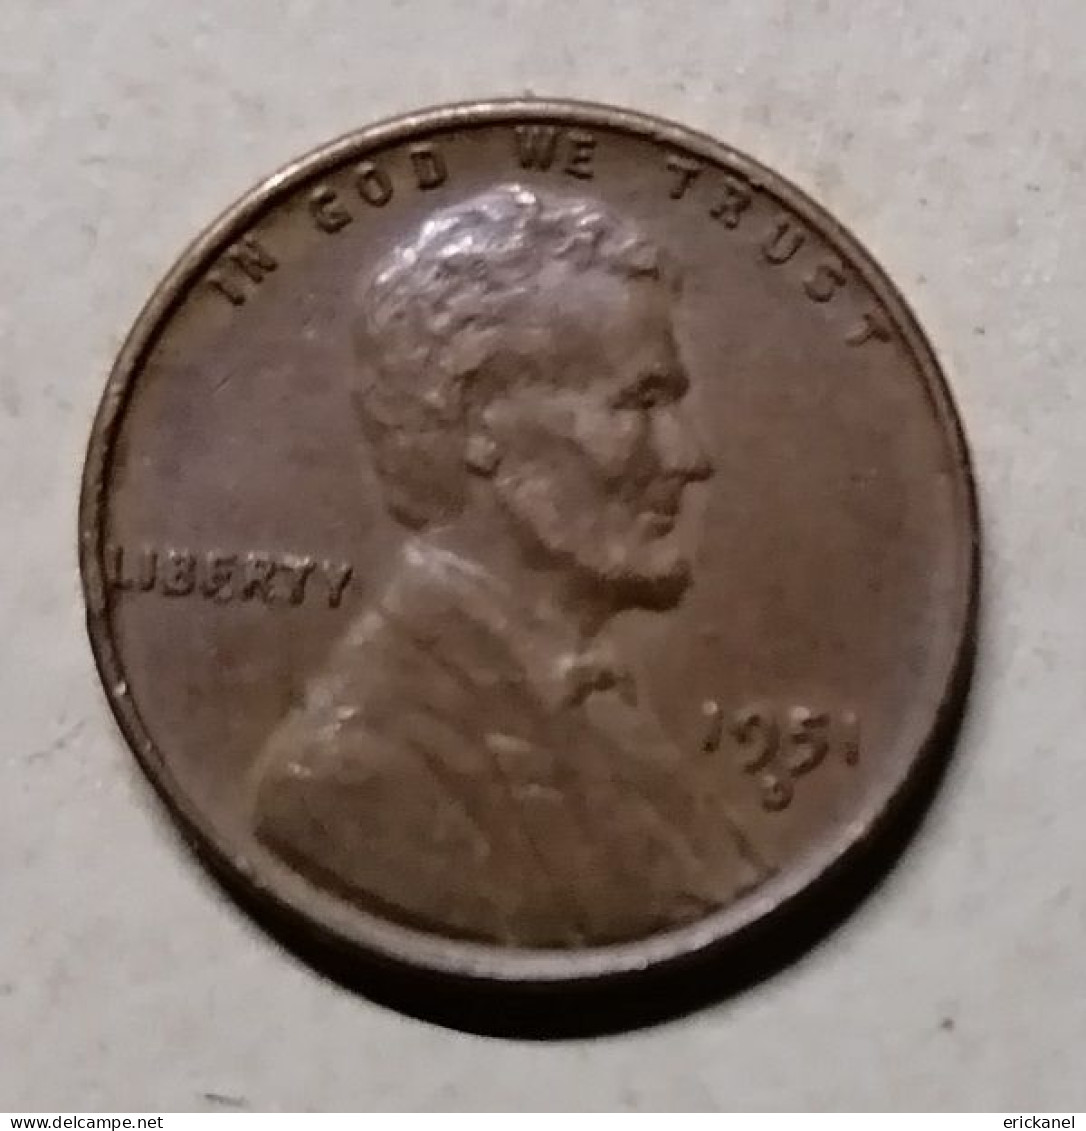 USA 1 CENT 1951 - 1909-1958: Lincoln, Wheat Ears Reverse